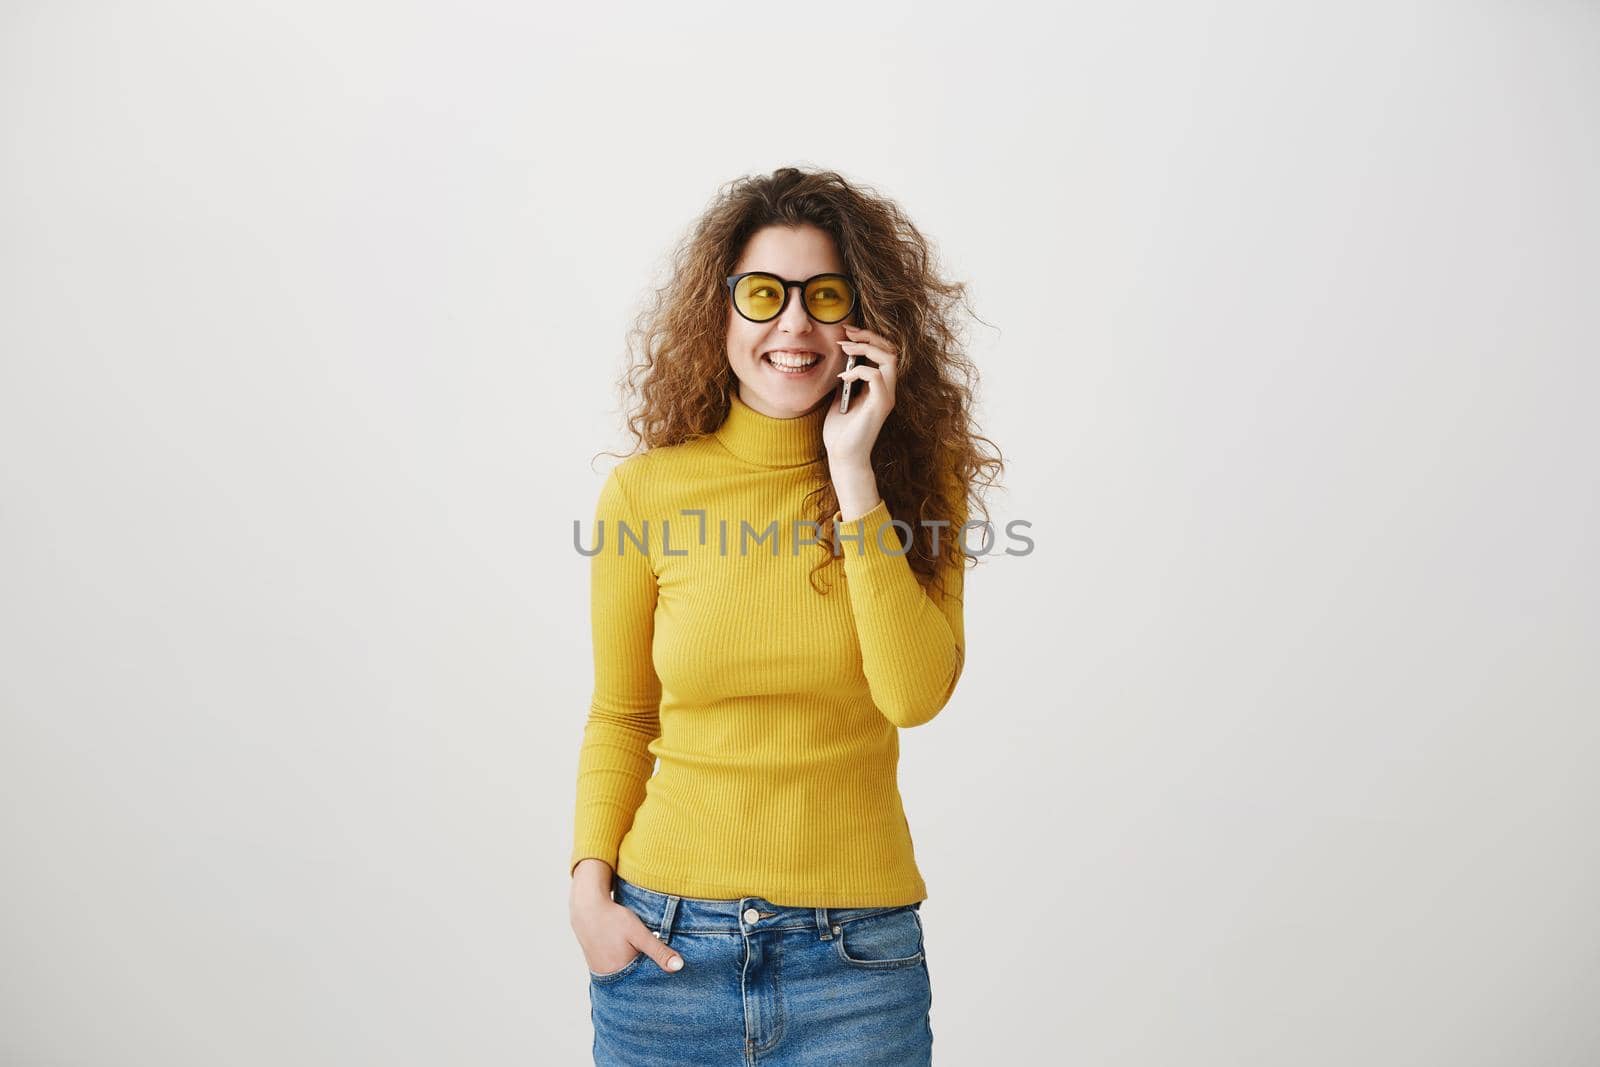 Cheerful young woman talking on mobile phone isolated on gray background